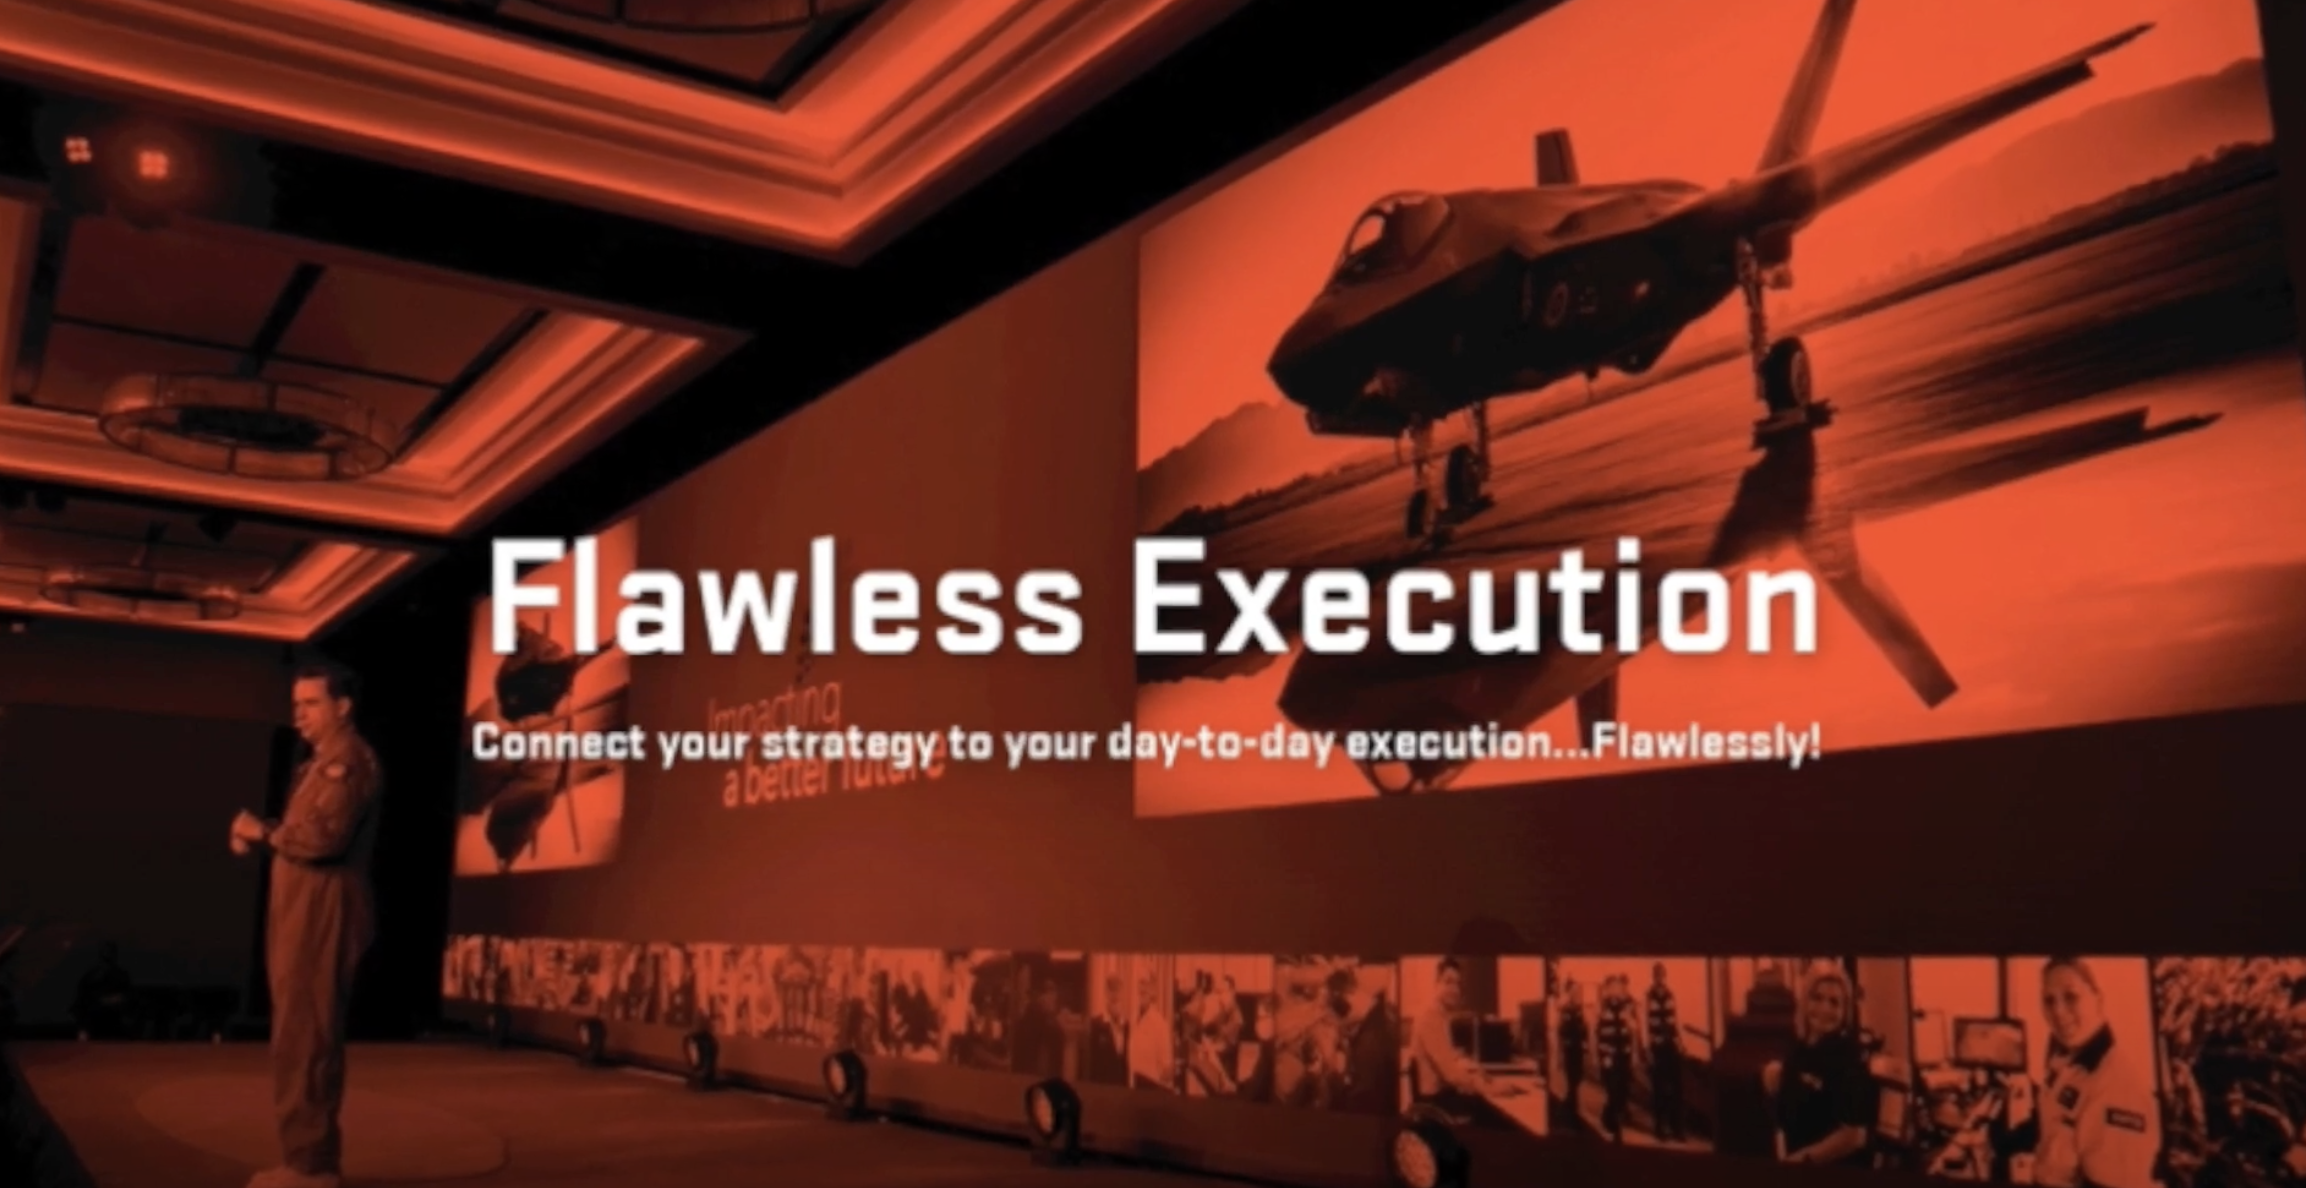 Our CEO, Christian “Boo” Boucousis, explains Flawless Execution